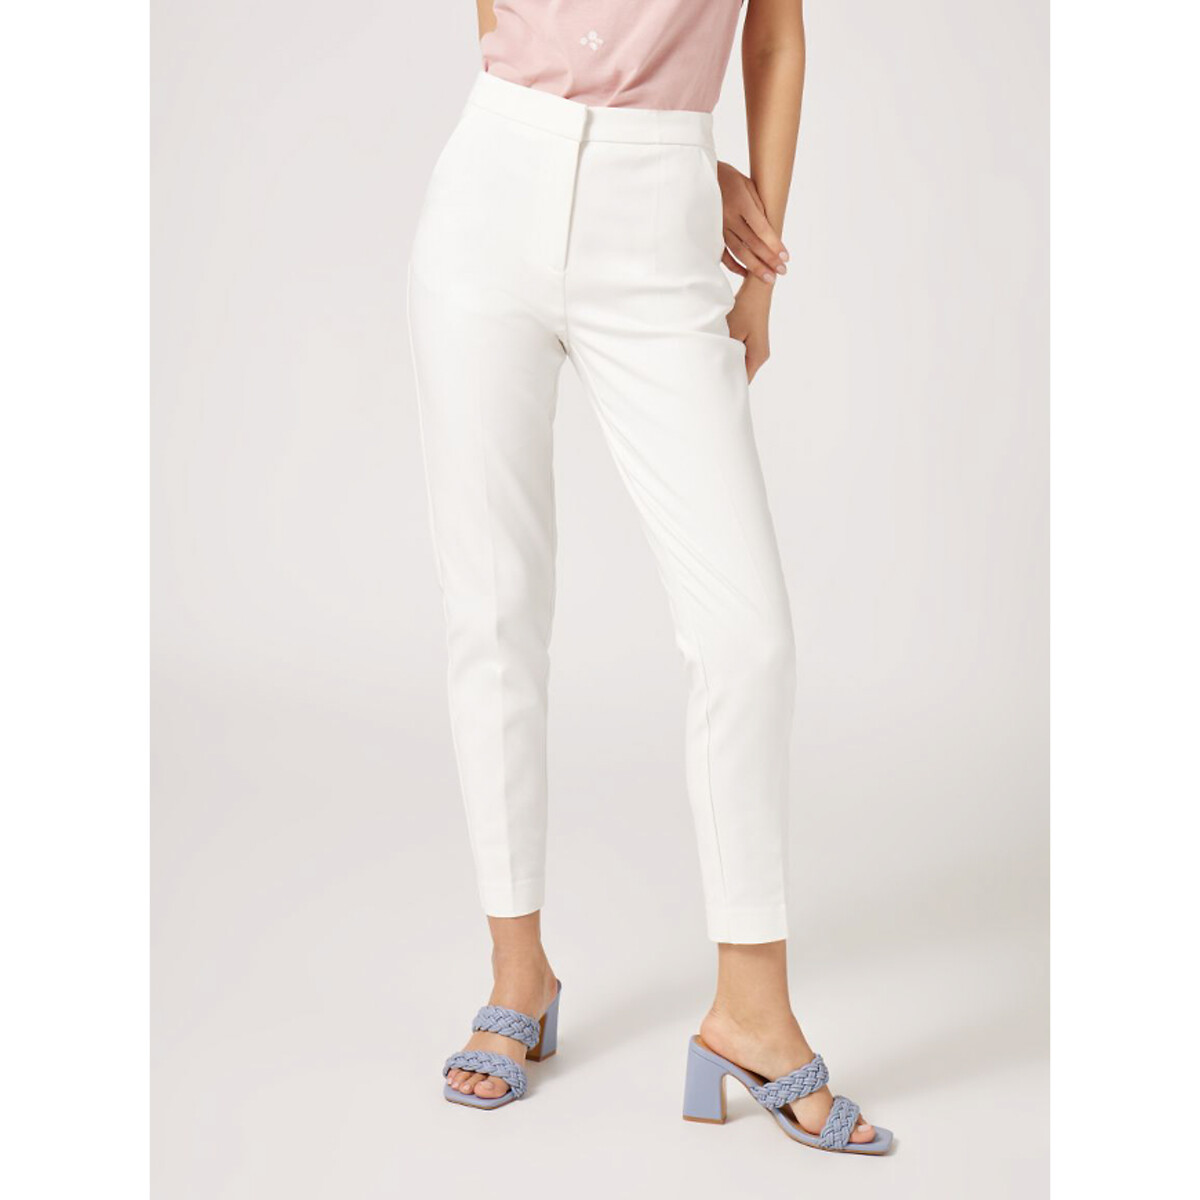 Image of Erita Formal Tapered Trousers in Cotton Mix